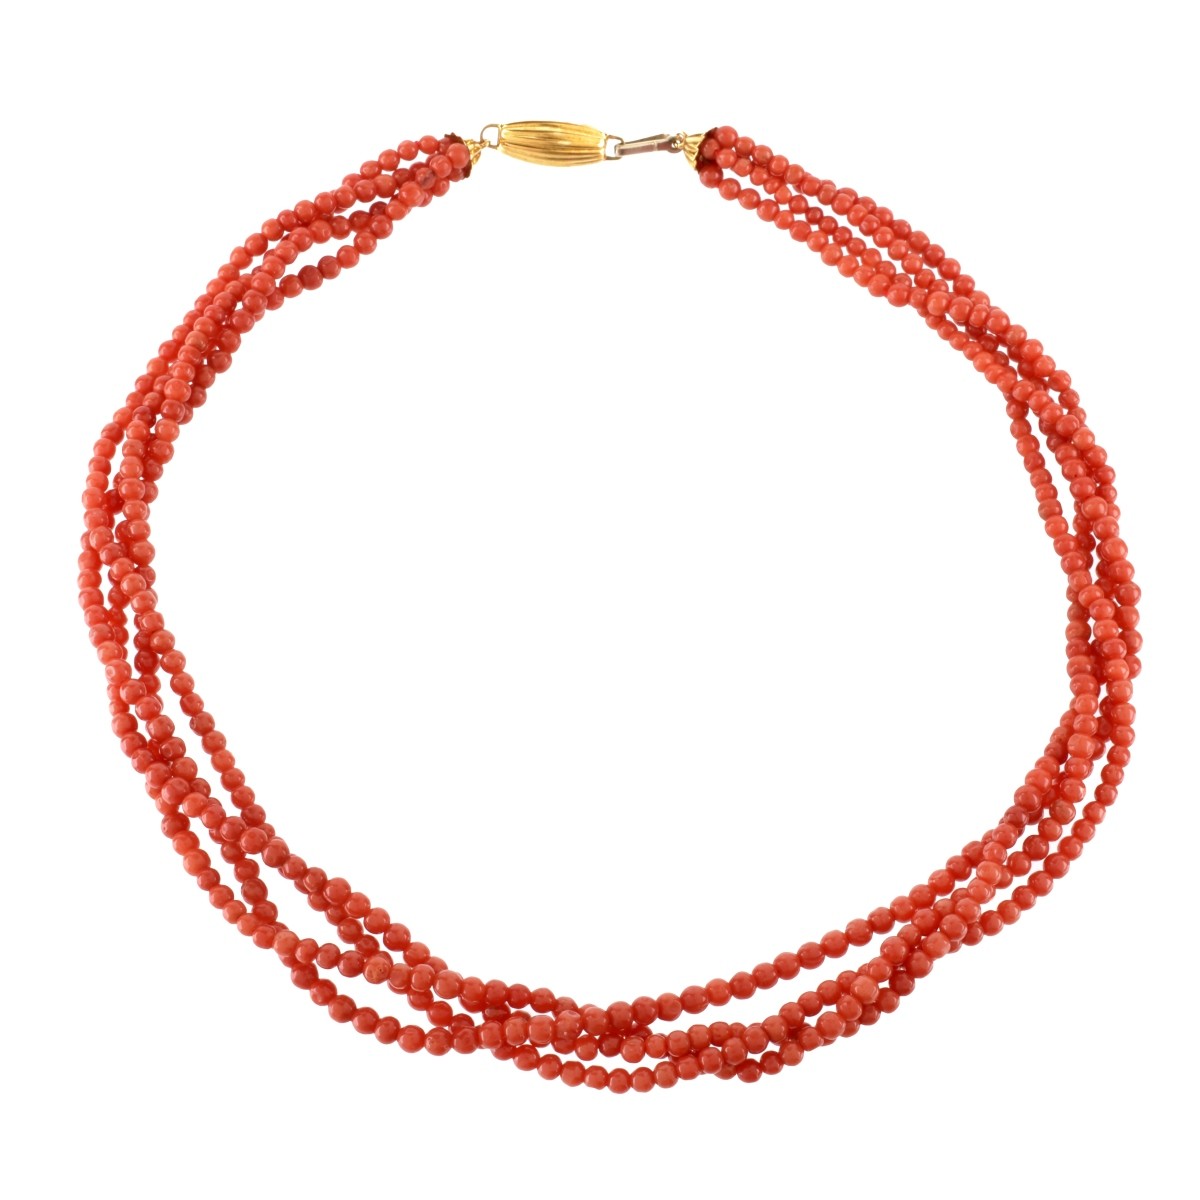 Coral Bead and 18K Necklace